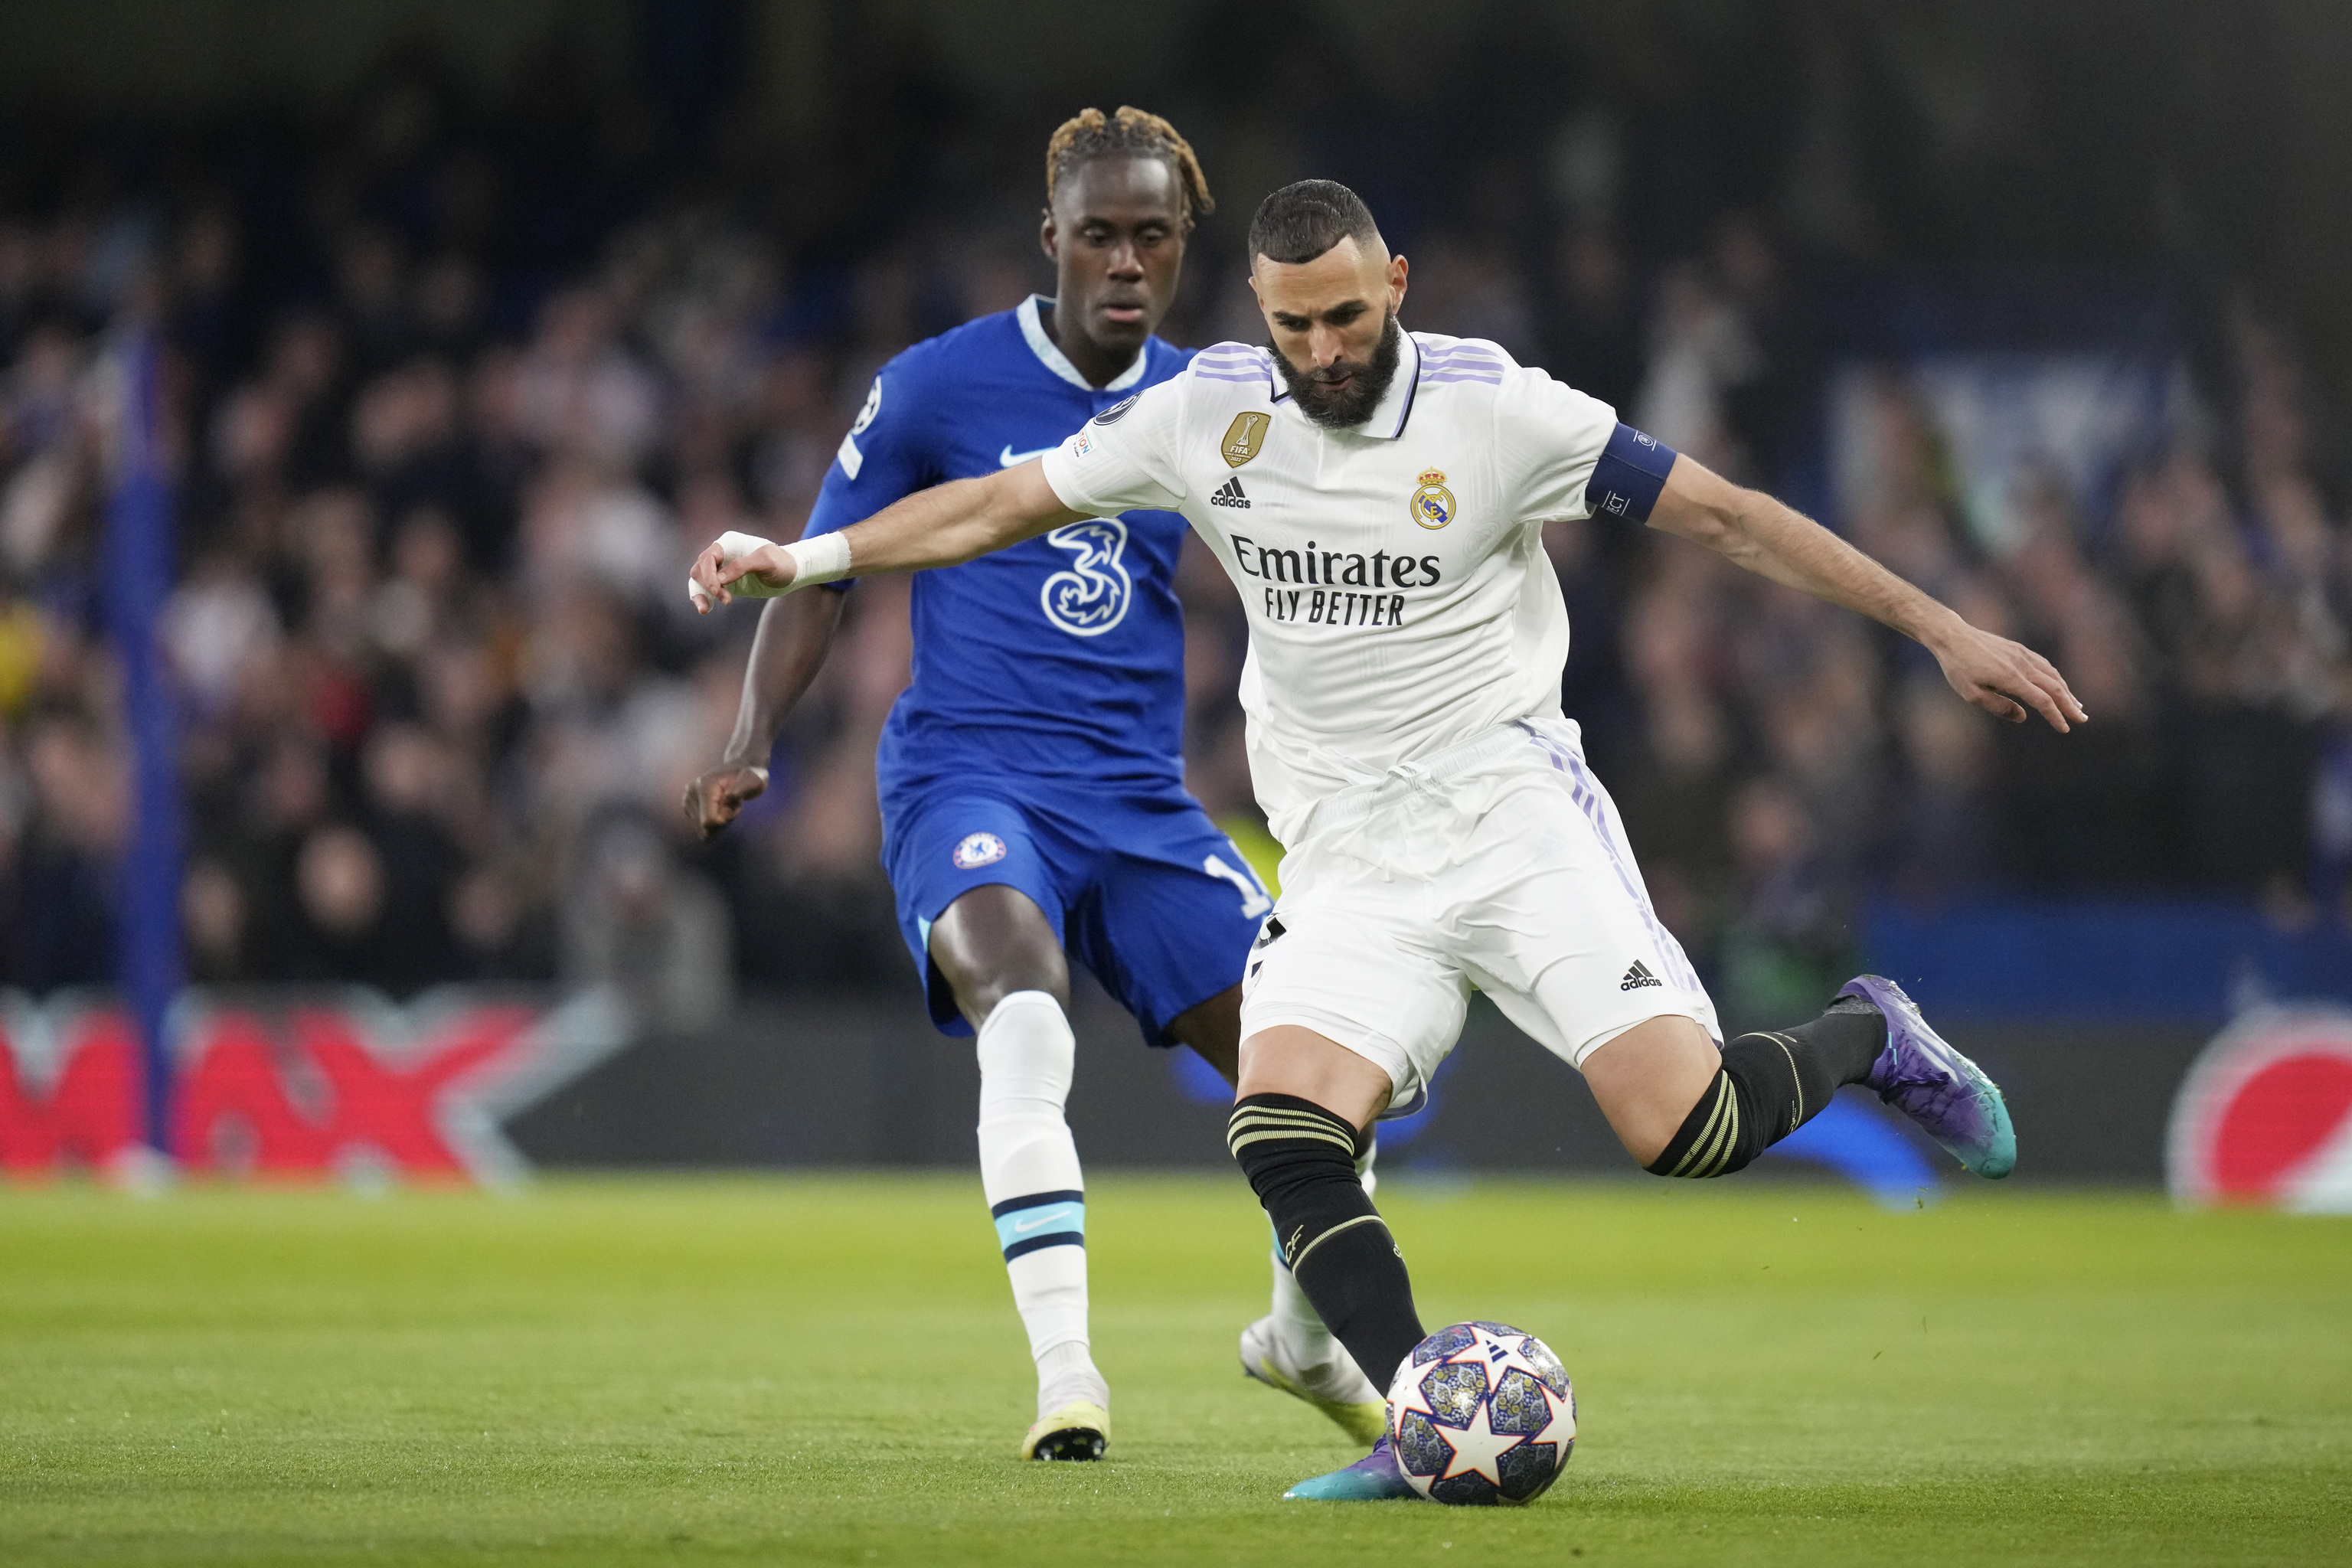 lt;HIT gt;Real lt;/HIT gt;  lt;HIT gt;Madrid lt;/HIT gt;'s Karim Benzema, right, and Chelsea's Trevoh Chalobah challenge for the ball during the Champions League quarterfinal second leg soccer match between Chelsea and  lt;HIT gt;Real lt;/HIT gt;  lt;HIT gt;Madrid lt;/HIT gt; at Stamford Bridge stadium in London, Tuesday, April 18, 2023. (AP Photo/Kirsty Wigglesworth)